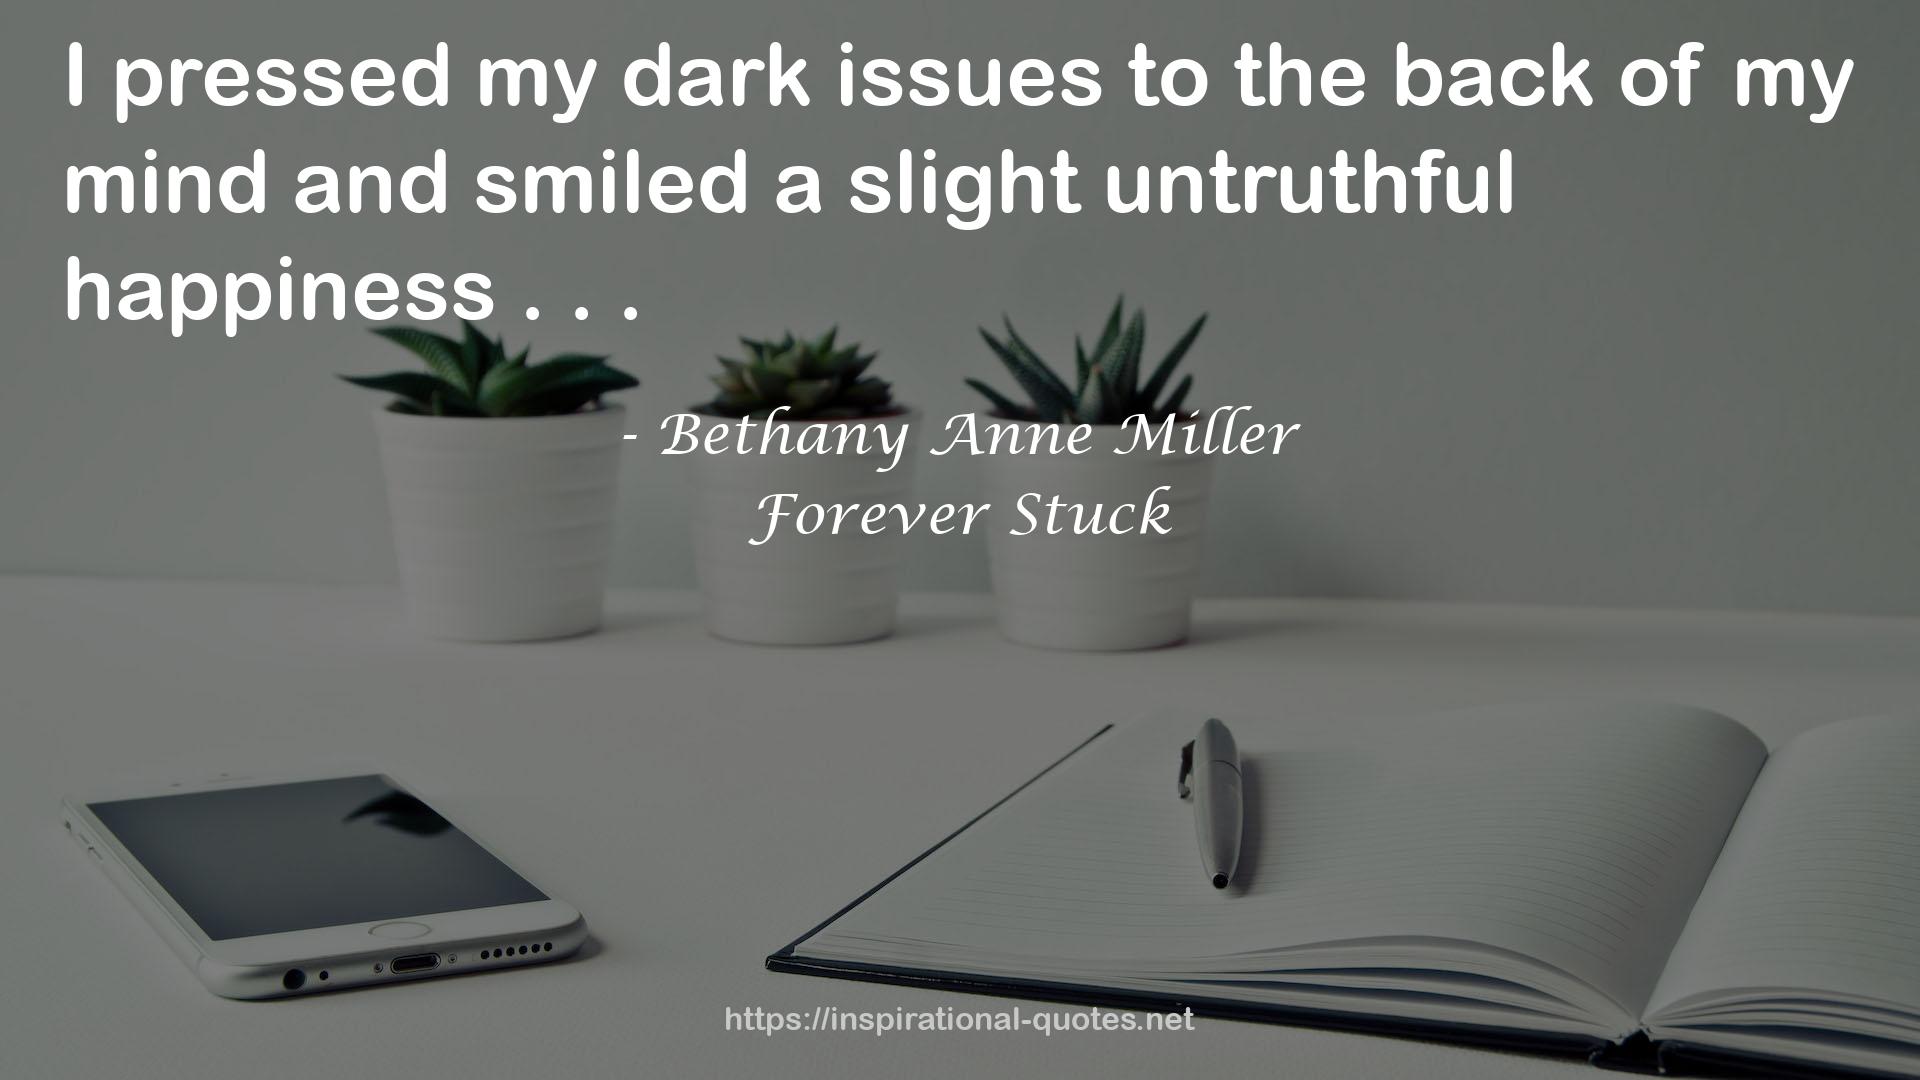 Bethany Anne Miller QUOTES